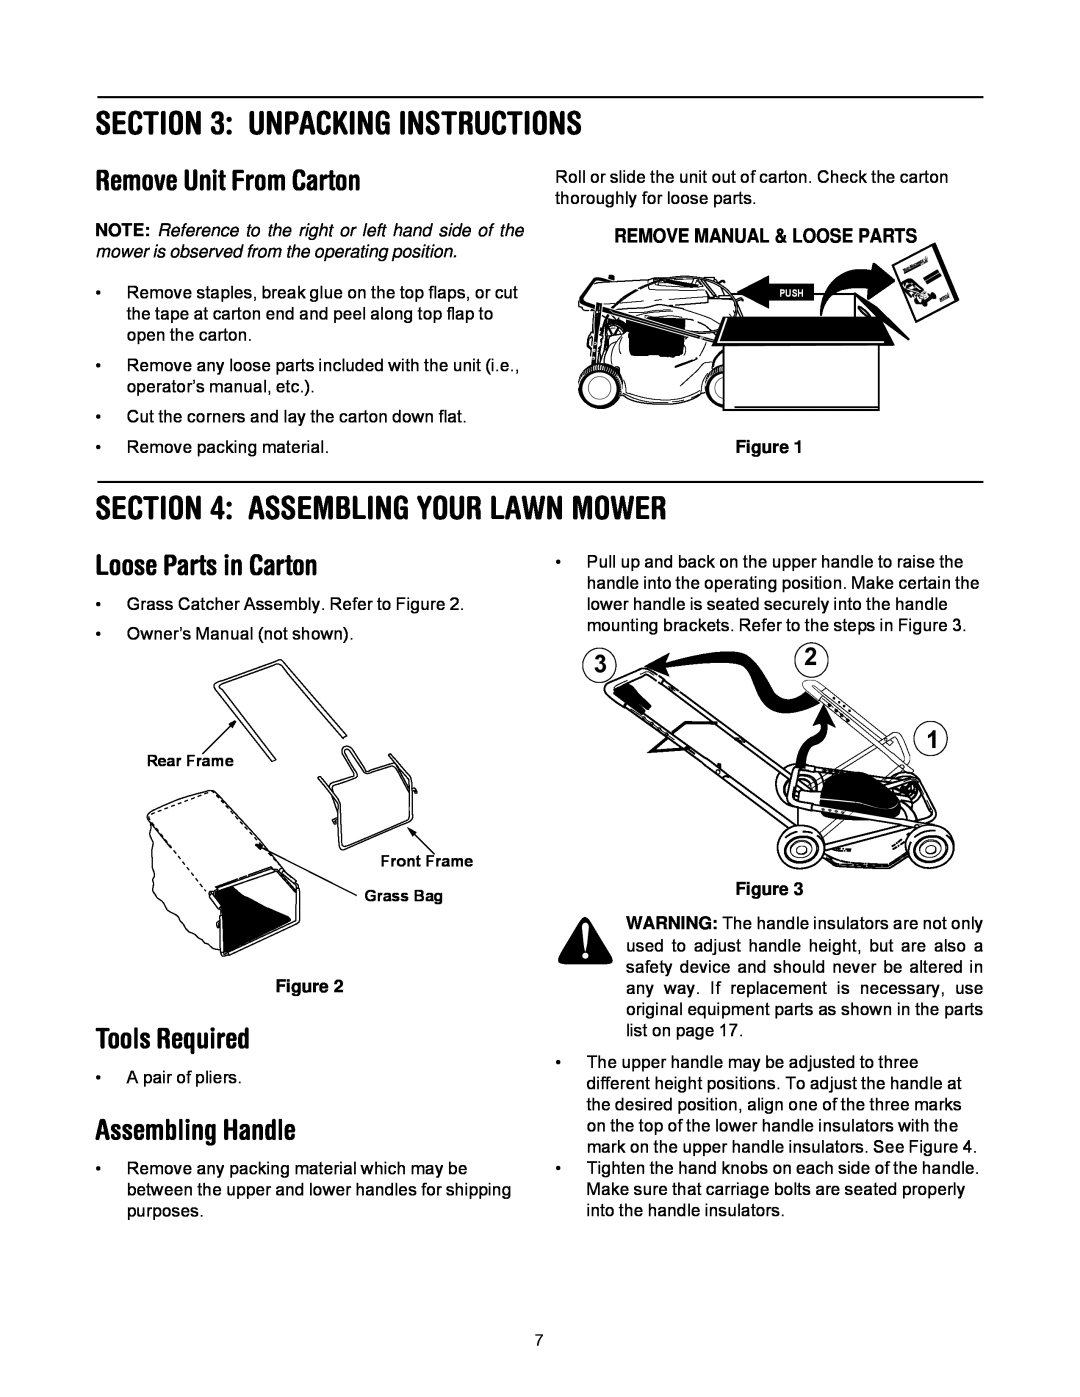 MTD 769-01445 manual Unpacking Instructions, Assembling Your Lawn Mower, Remove Unit From Carton, Loose Parts in Carton 